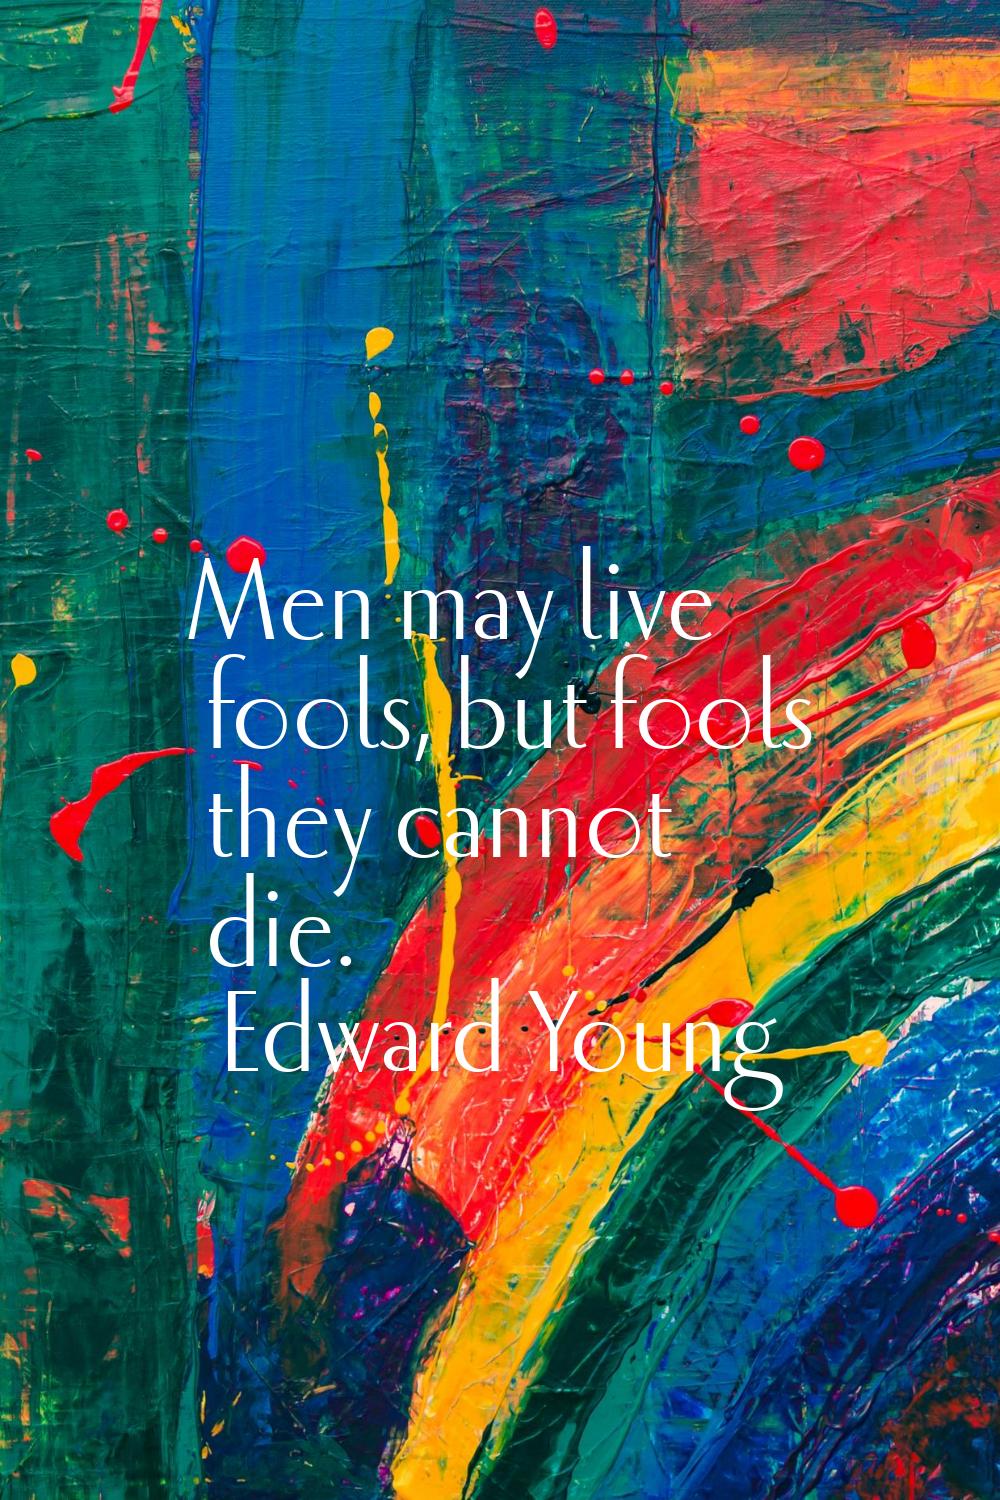 Men may live fools, but fools they cannot die.